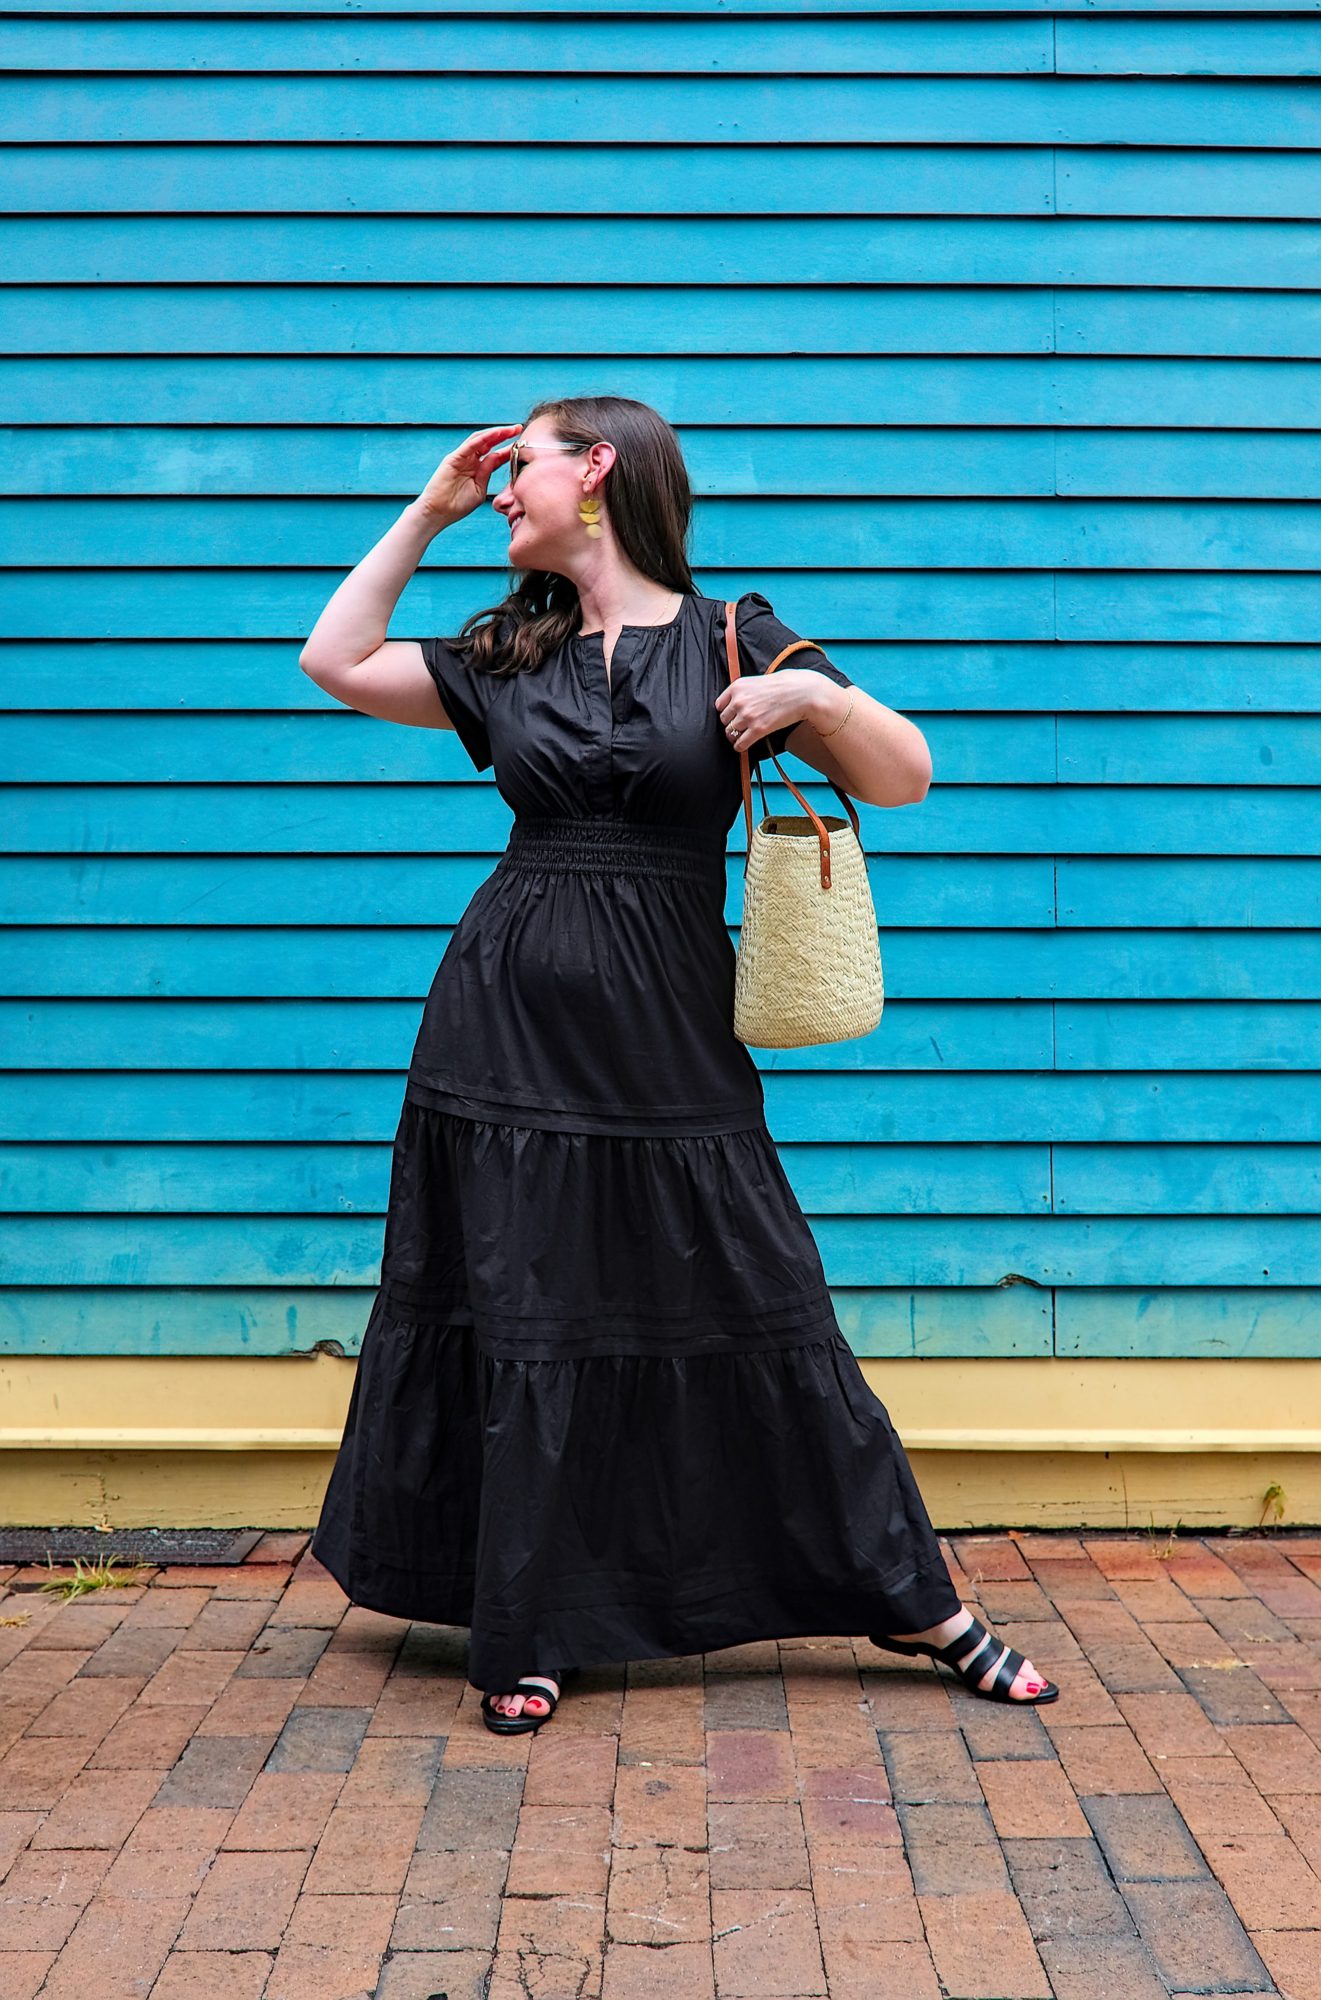 Alyssa wears the Quince Cotton Tiered Maxi Dress with sandals and a basket purse and turns her head to the side